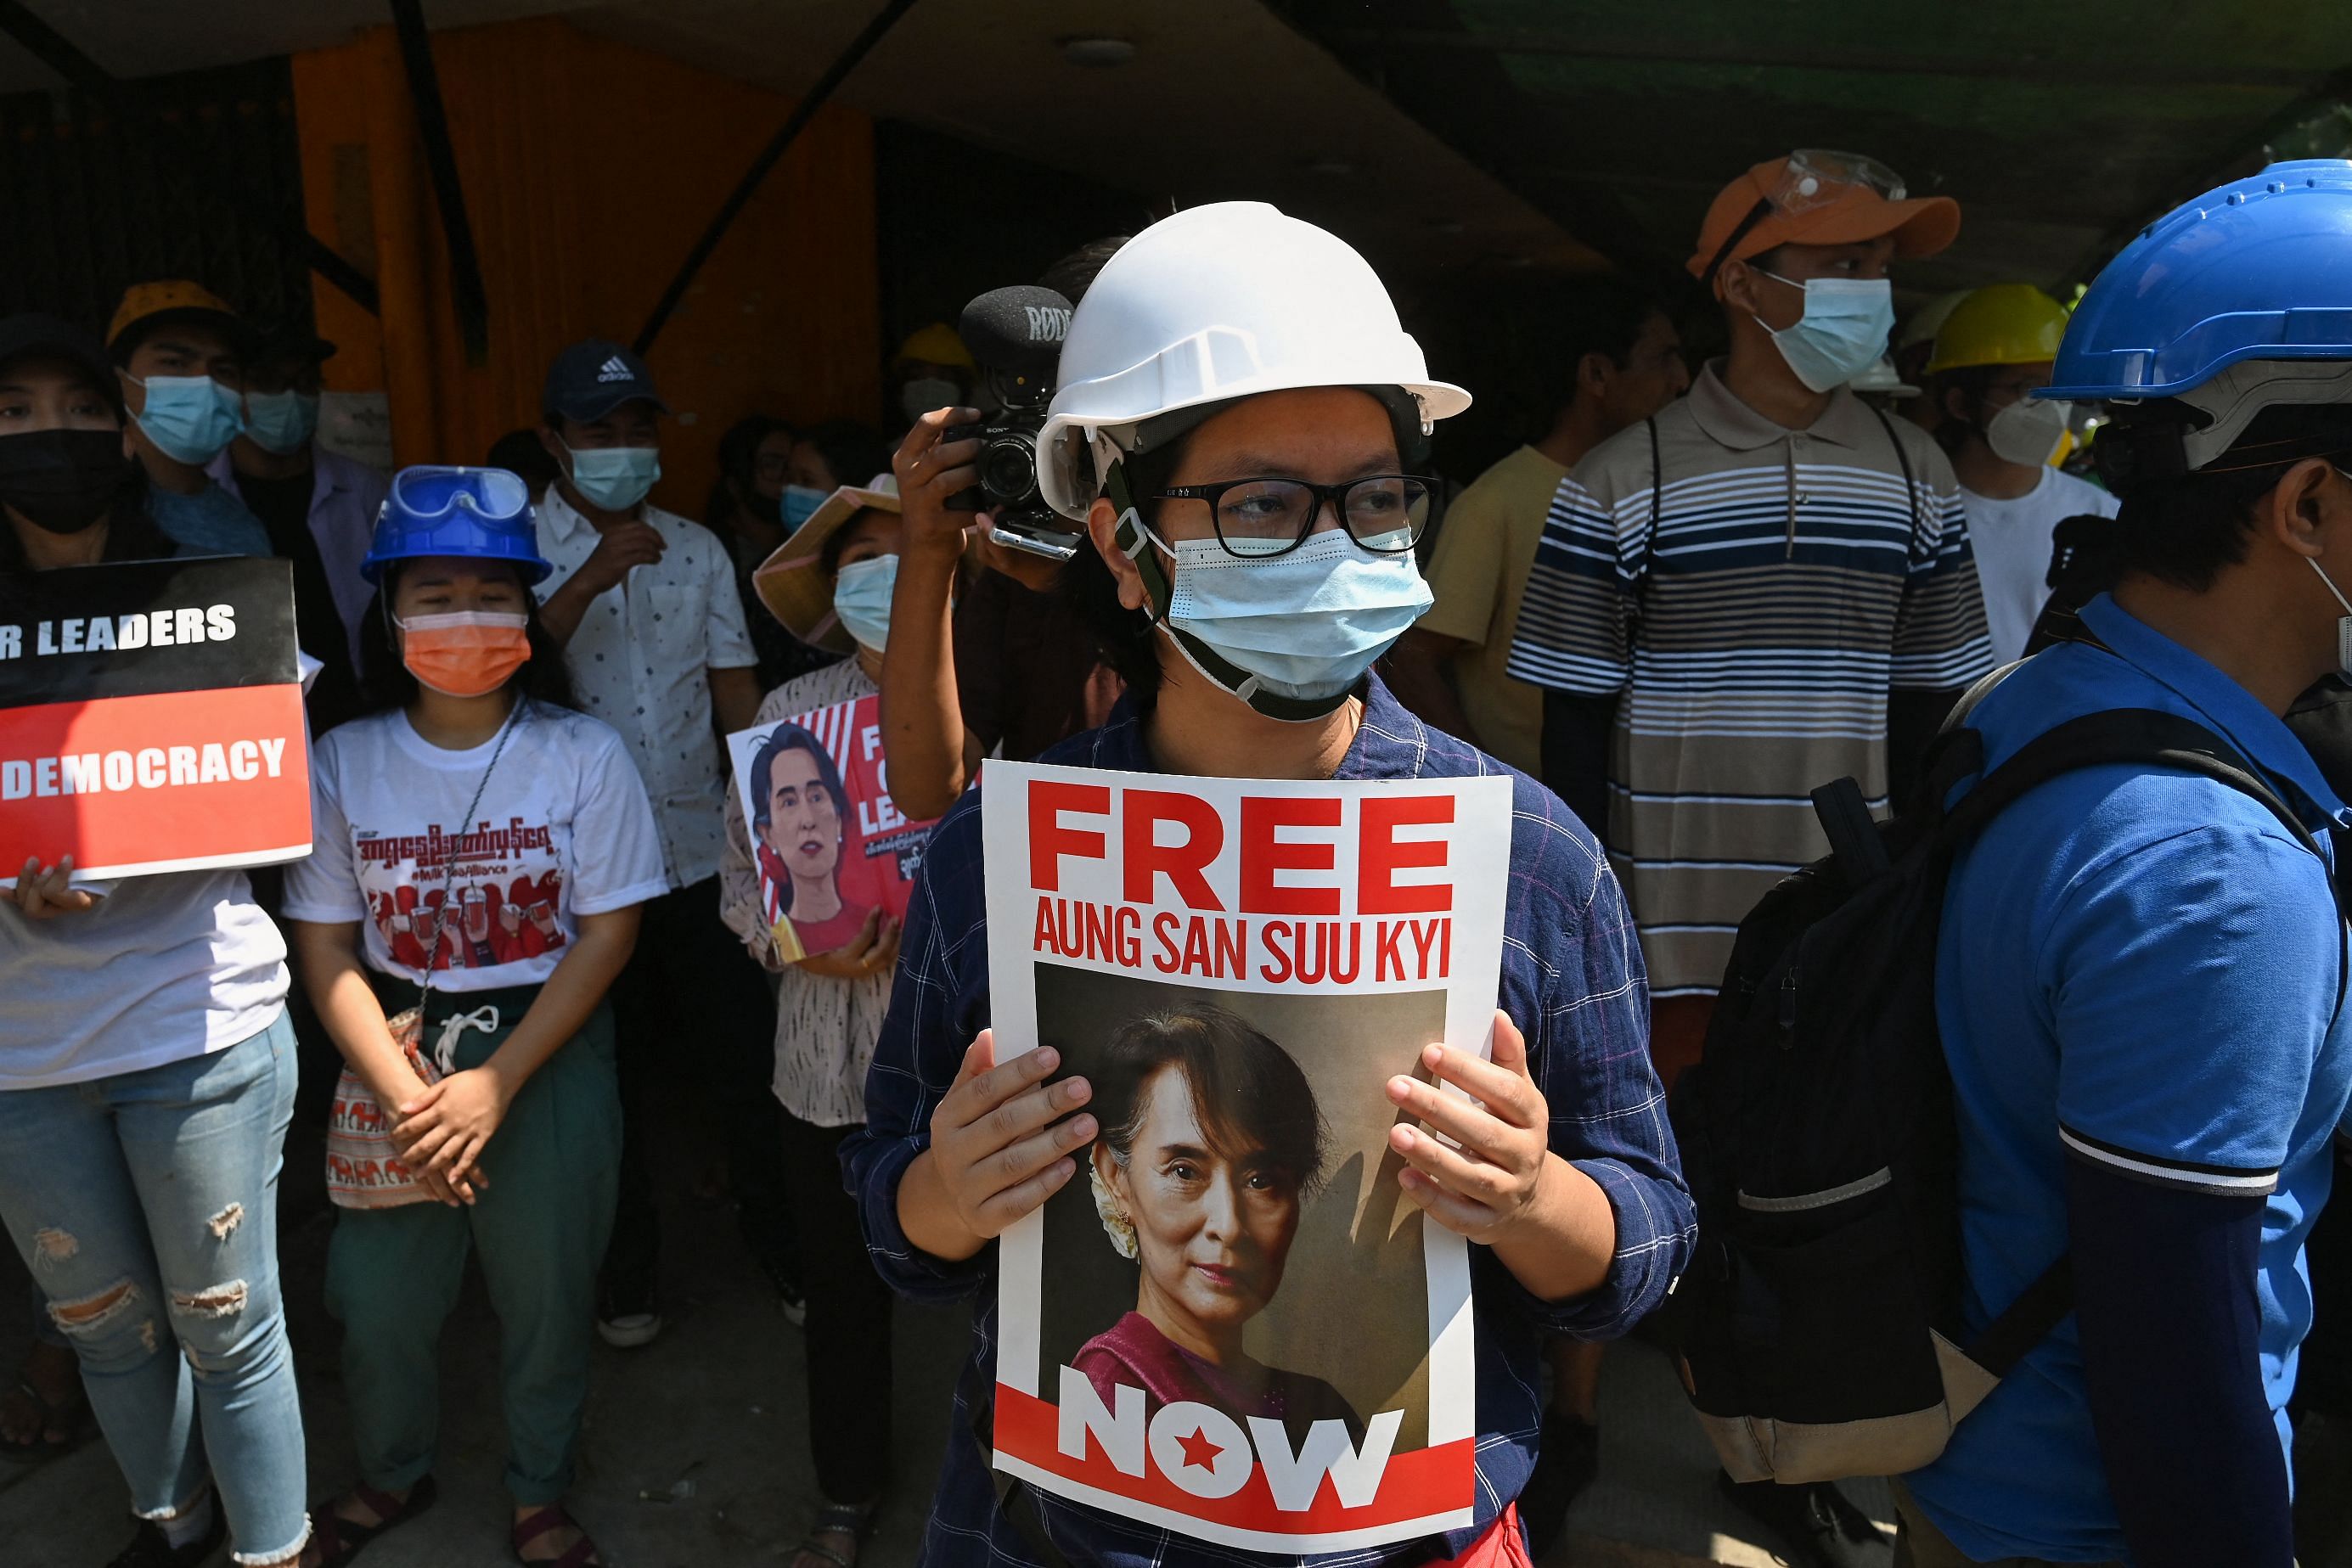 A protester holds a sign calling for the release of detained Myanmar civilian leader Aung San Suu Kyi during a demonstration against the military coup in Yangon on March 7, 2021. Credit: AFP Photo